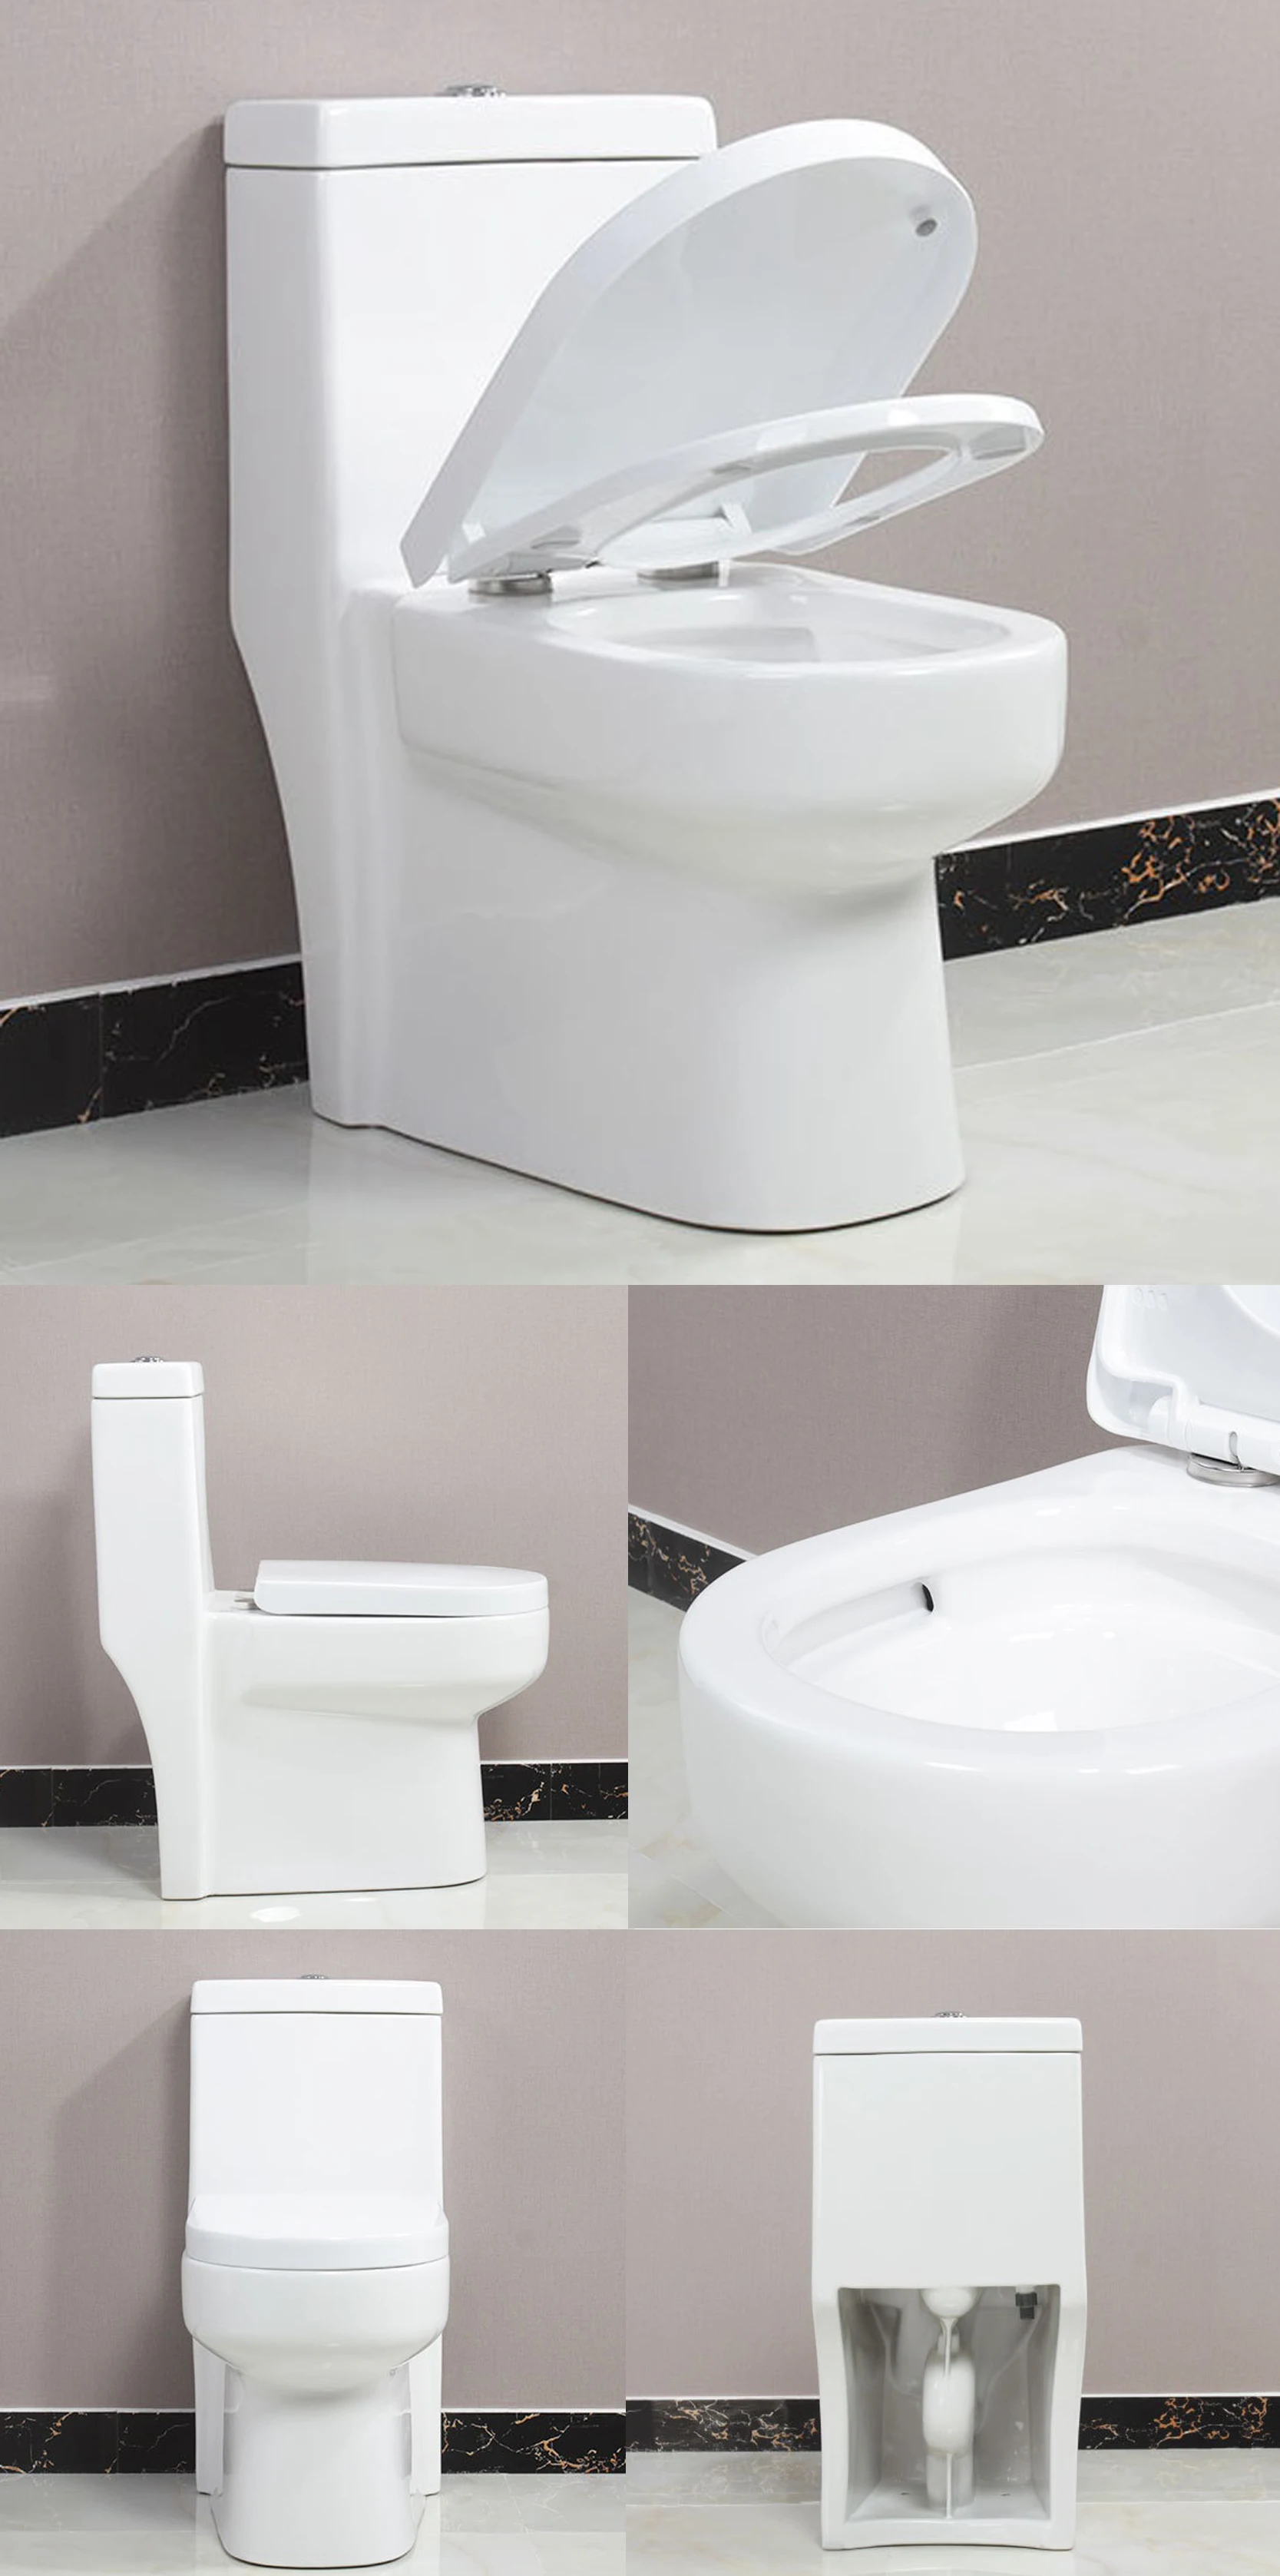 Ceramic Sanitary Ware Cyclone One Piece Toilet Wc Piss Toilet 890